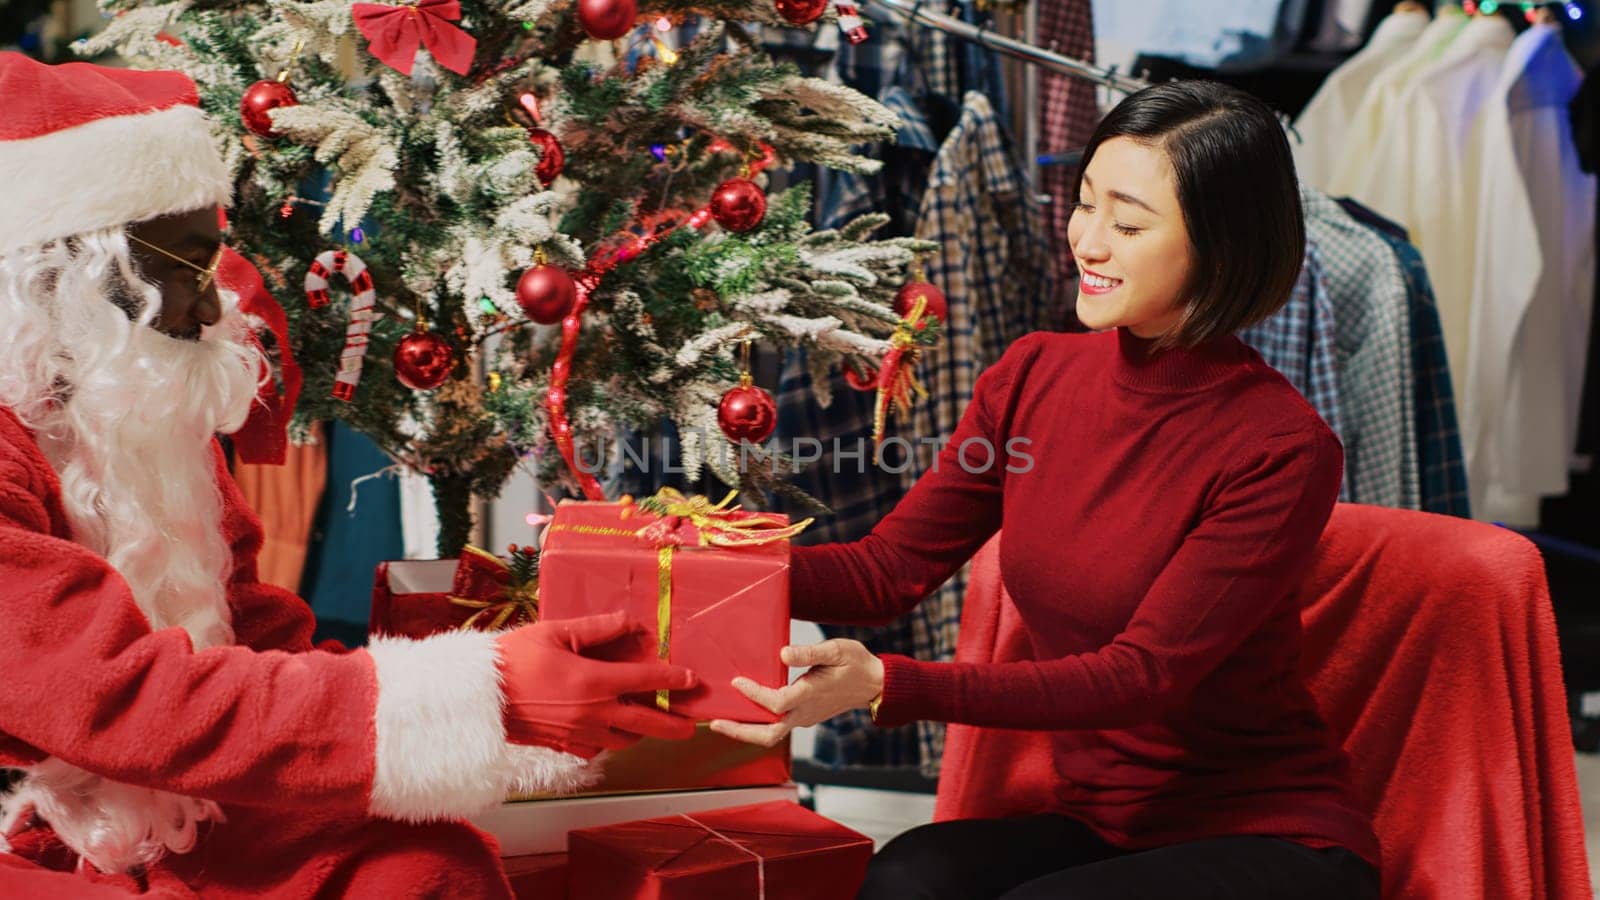 Customer in fashion store talking with actor dressed as Santa Claus, sitting next to Christmas tree during festive promotional event. Client receiving present from worker during holiday season